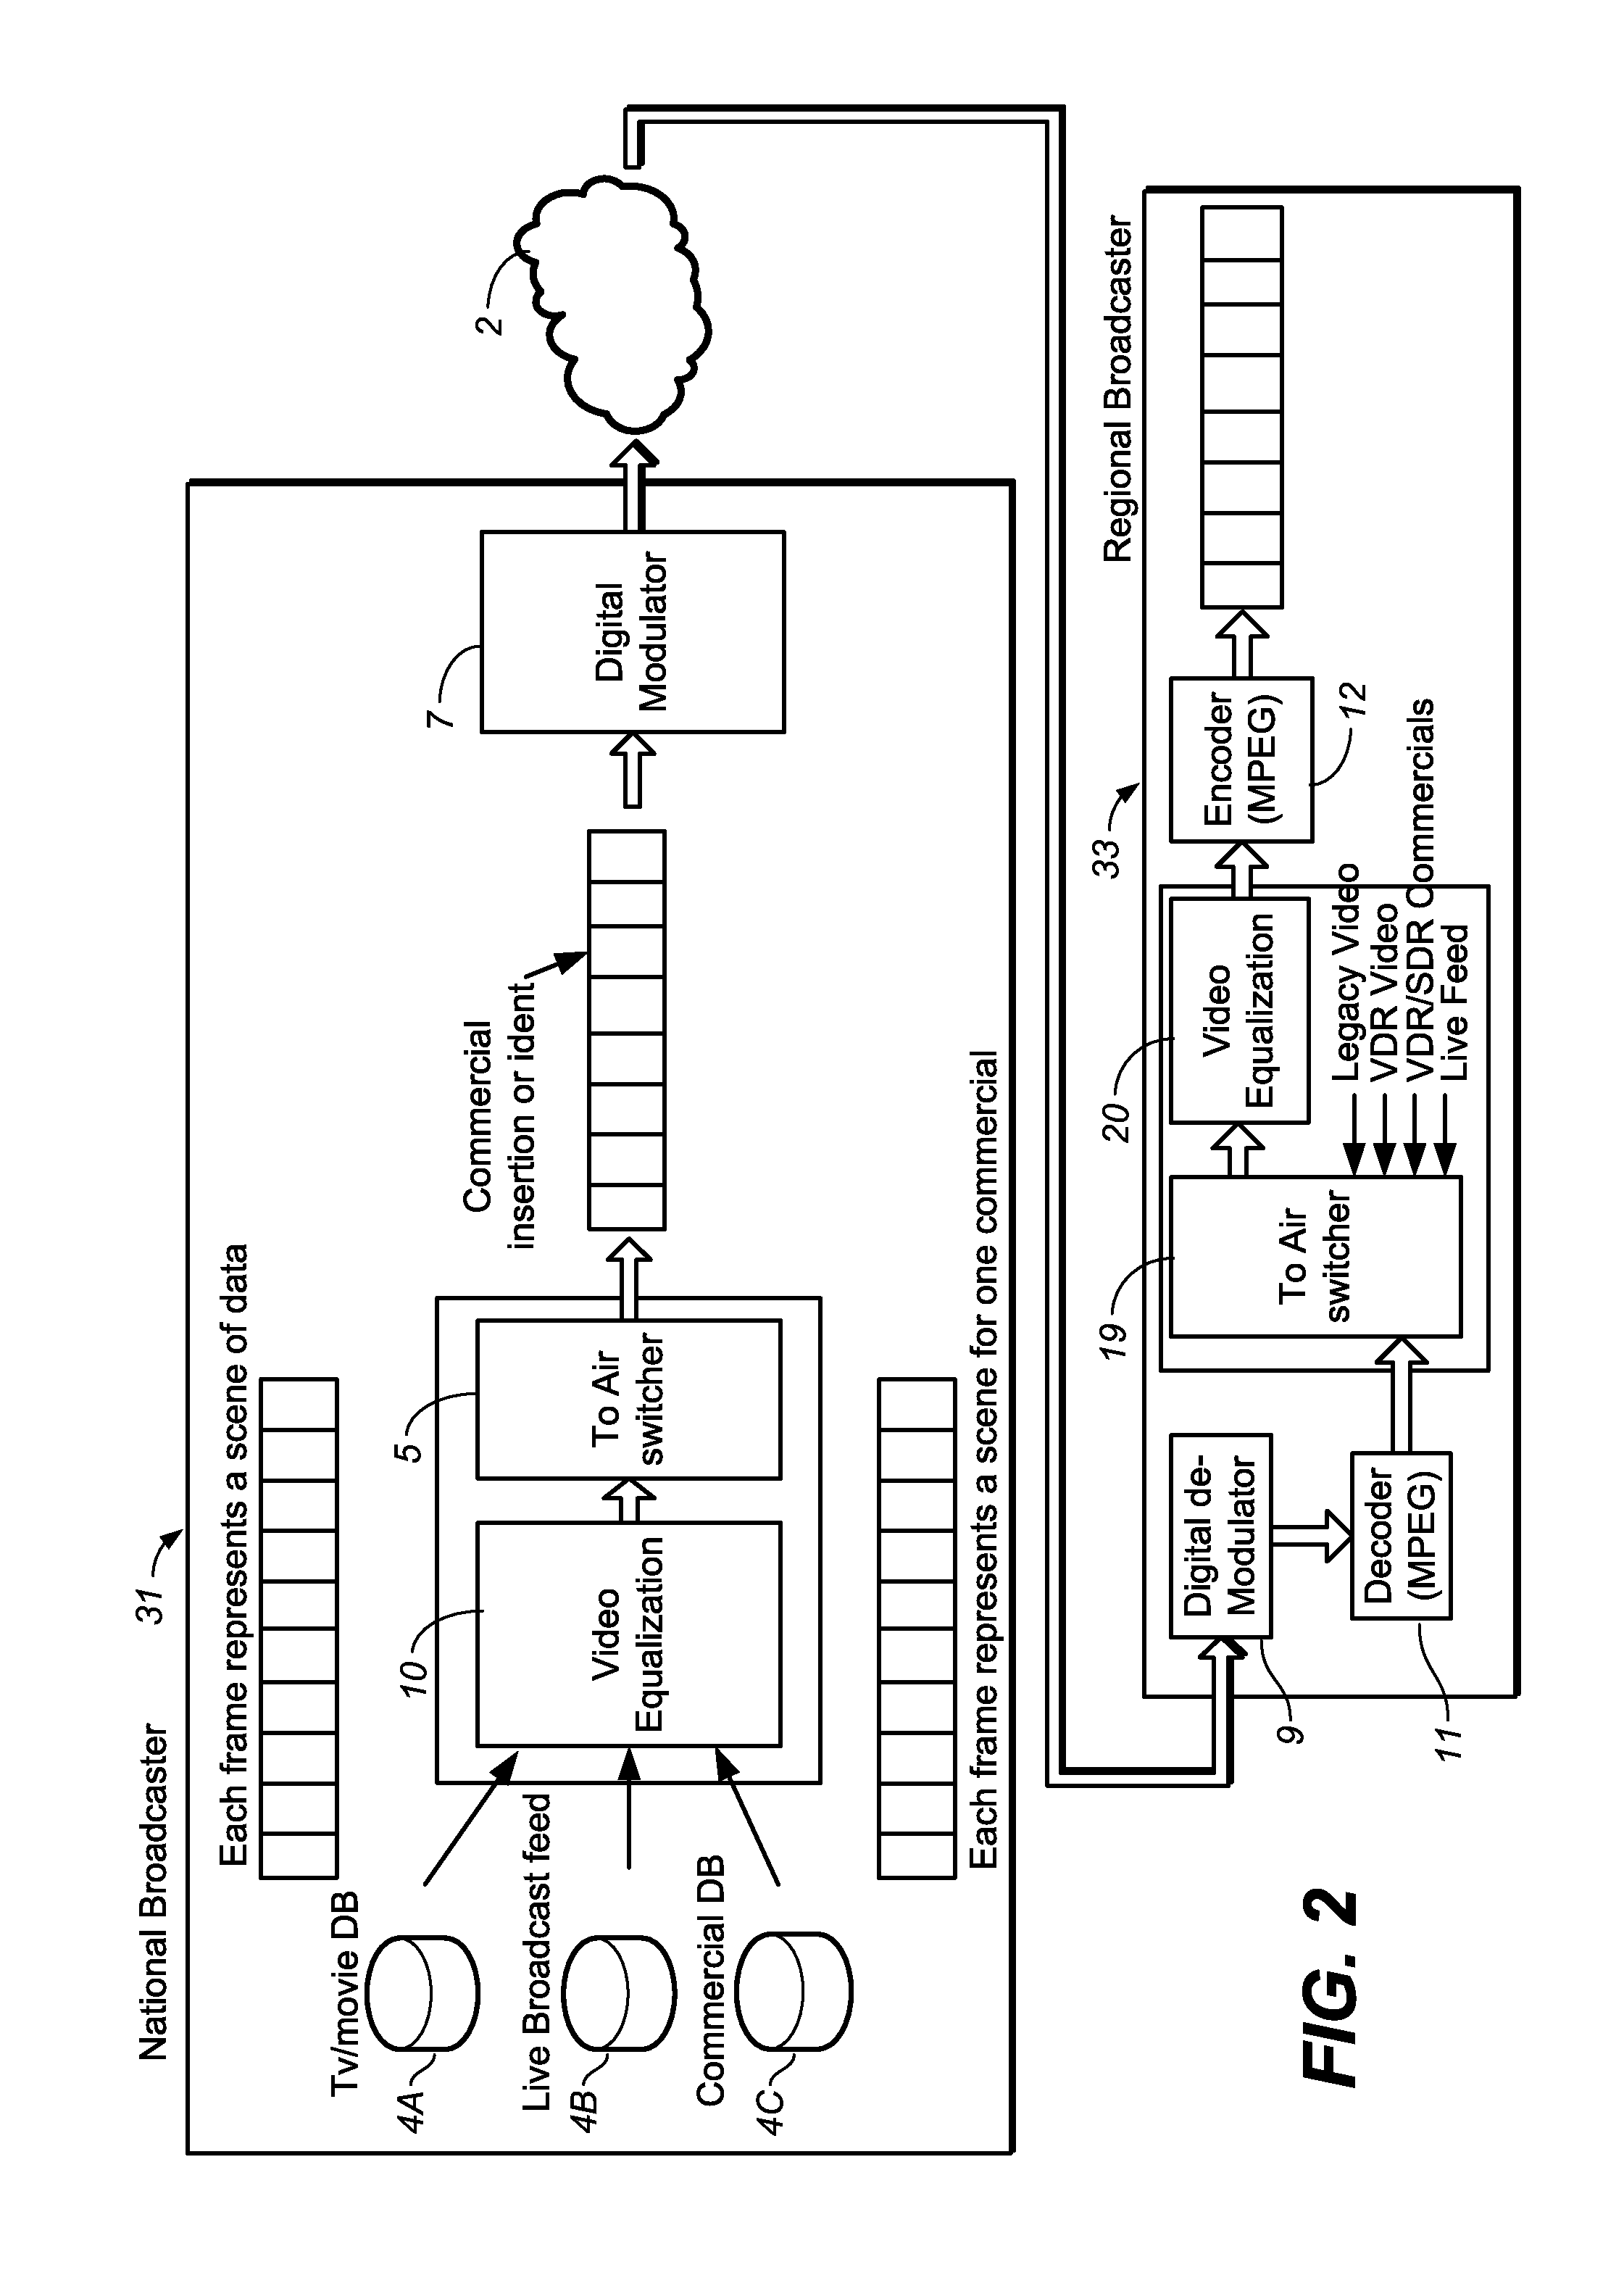 Method and system for video equalization